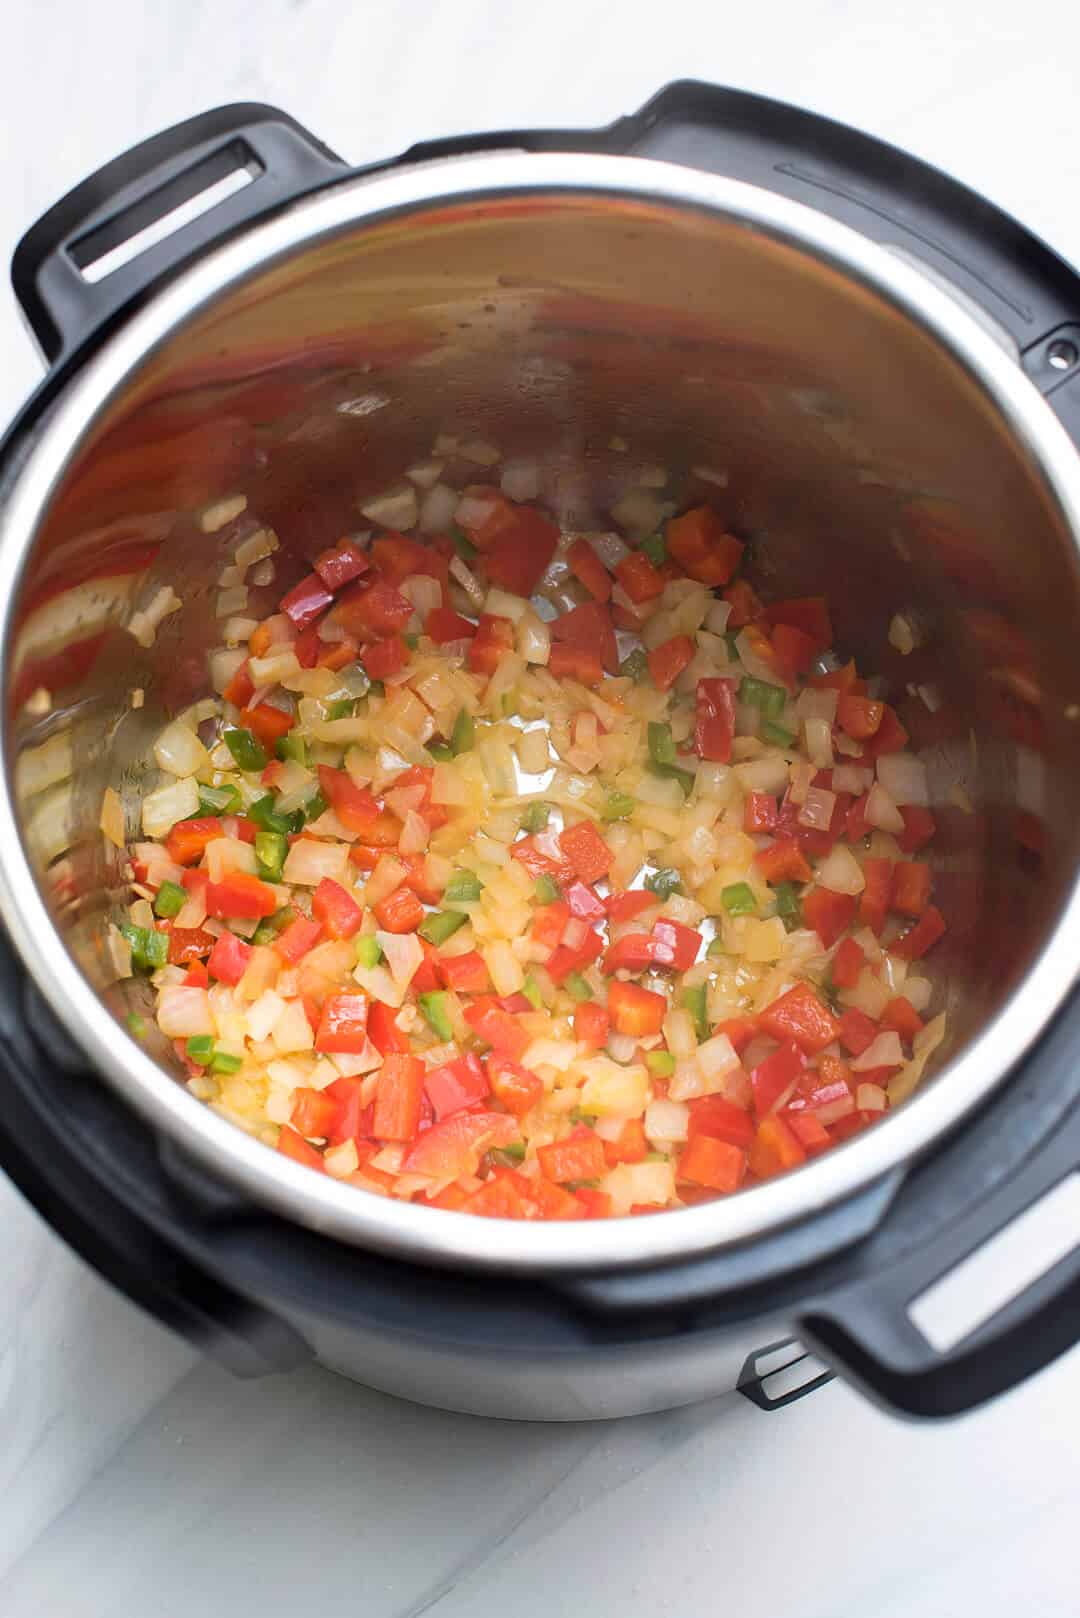 An over the top image of the onion, bell peppers and garlic cooking in the Instant Pot.